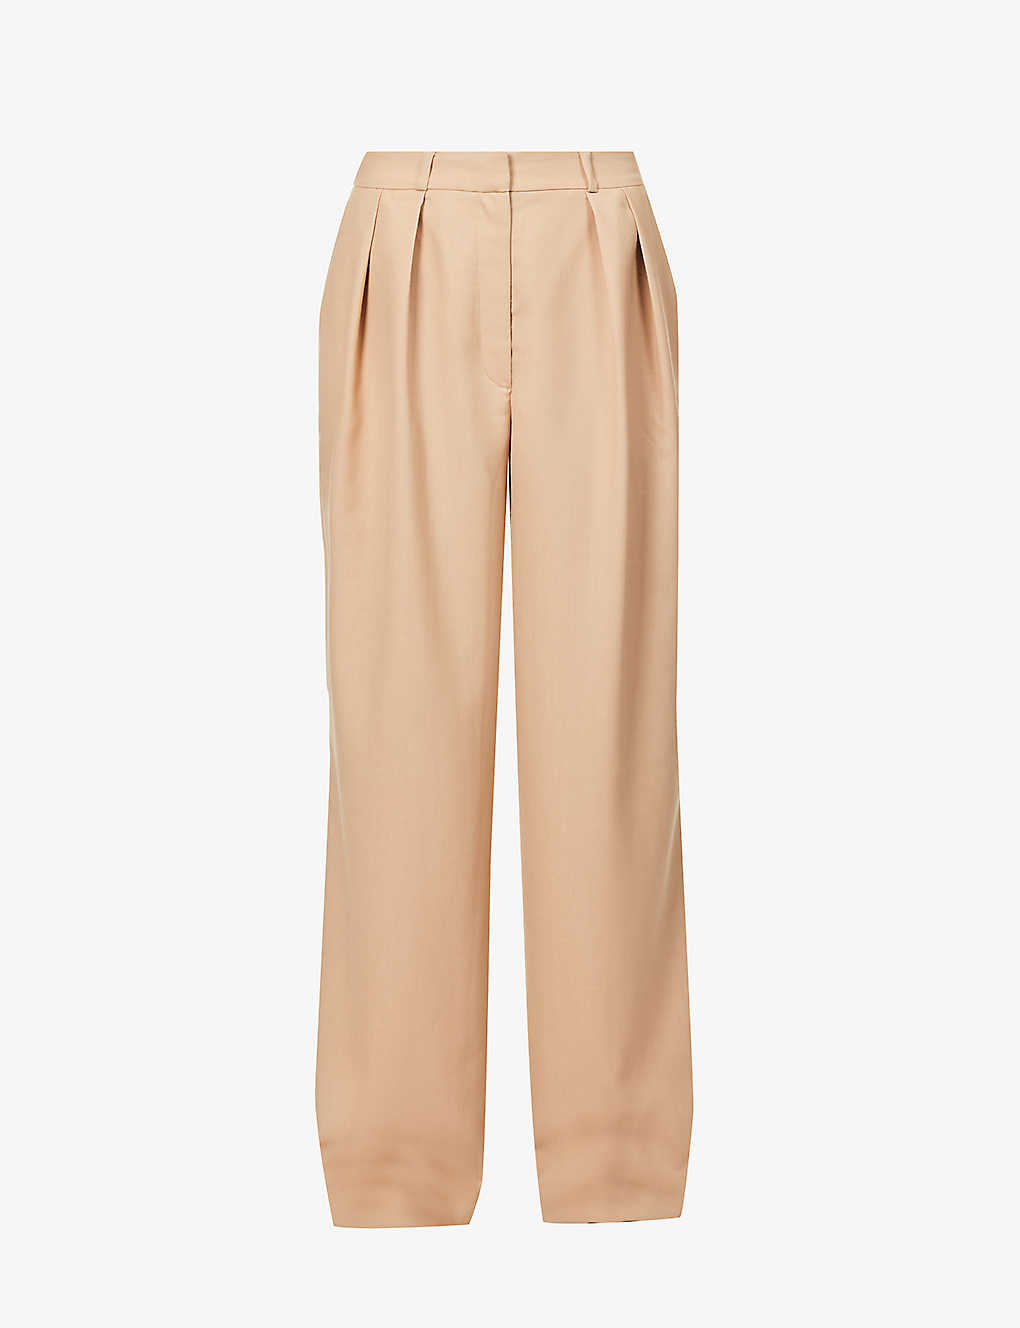 THE FRANKIE SHOP FRANKIE SHOP WOMEN'S CAMEL TANSY WIDE-LEG HIGH-RISE WOVEN TROUSERS